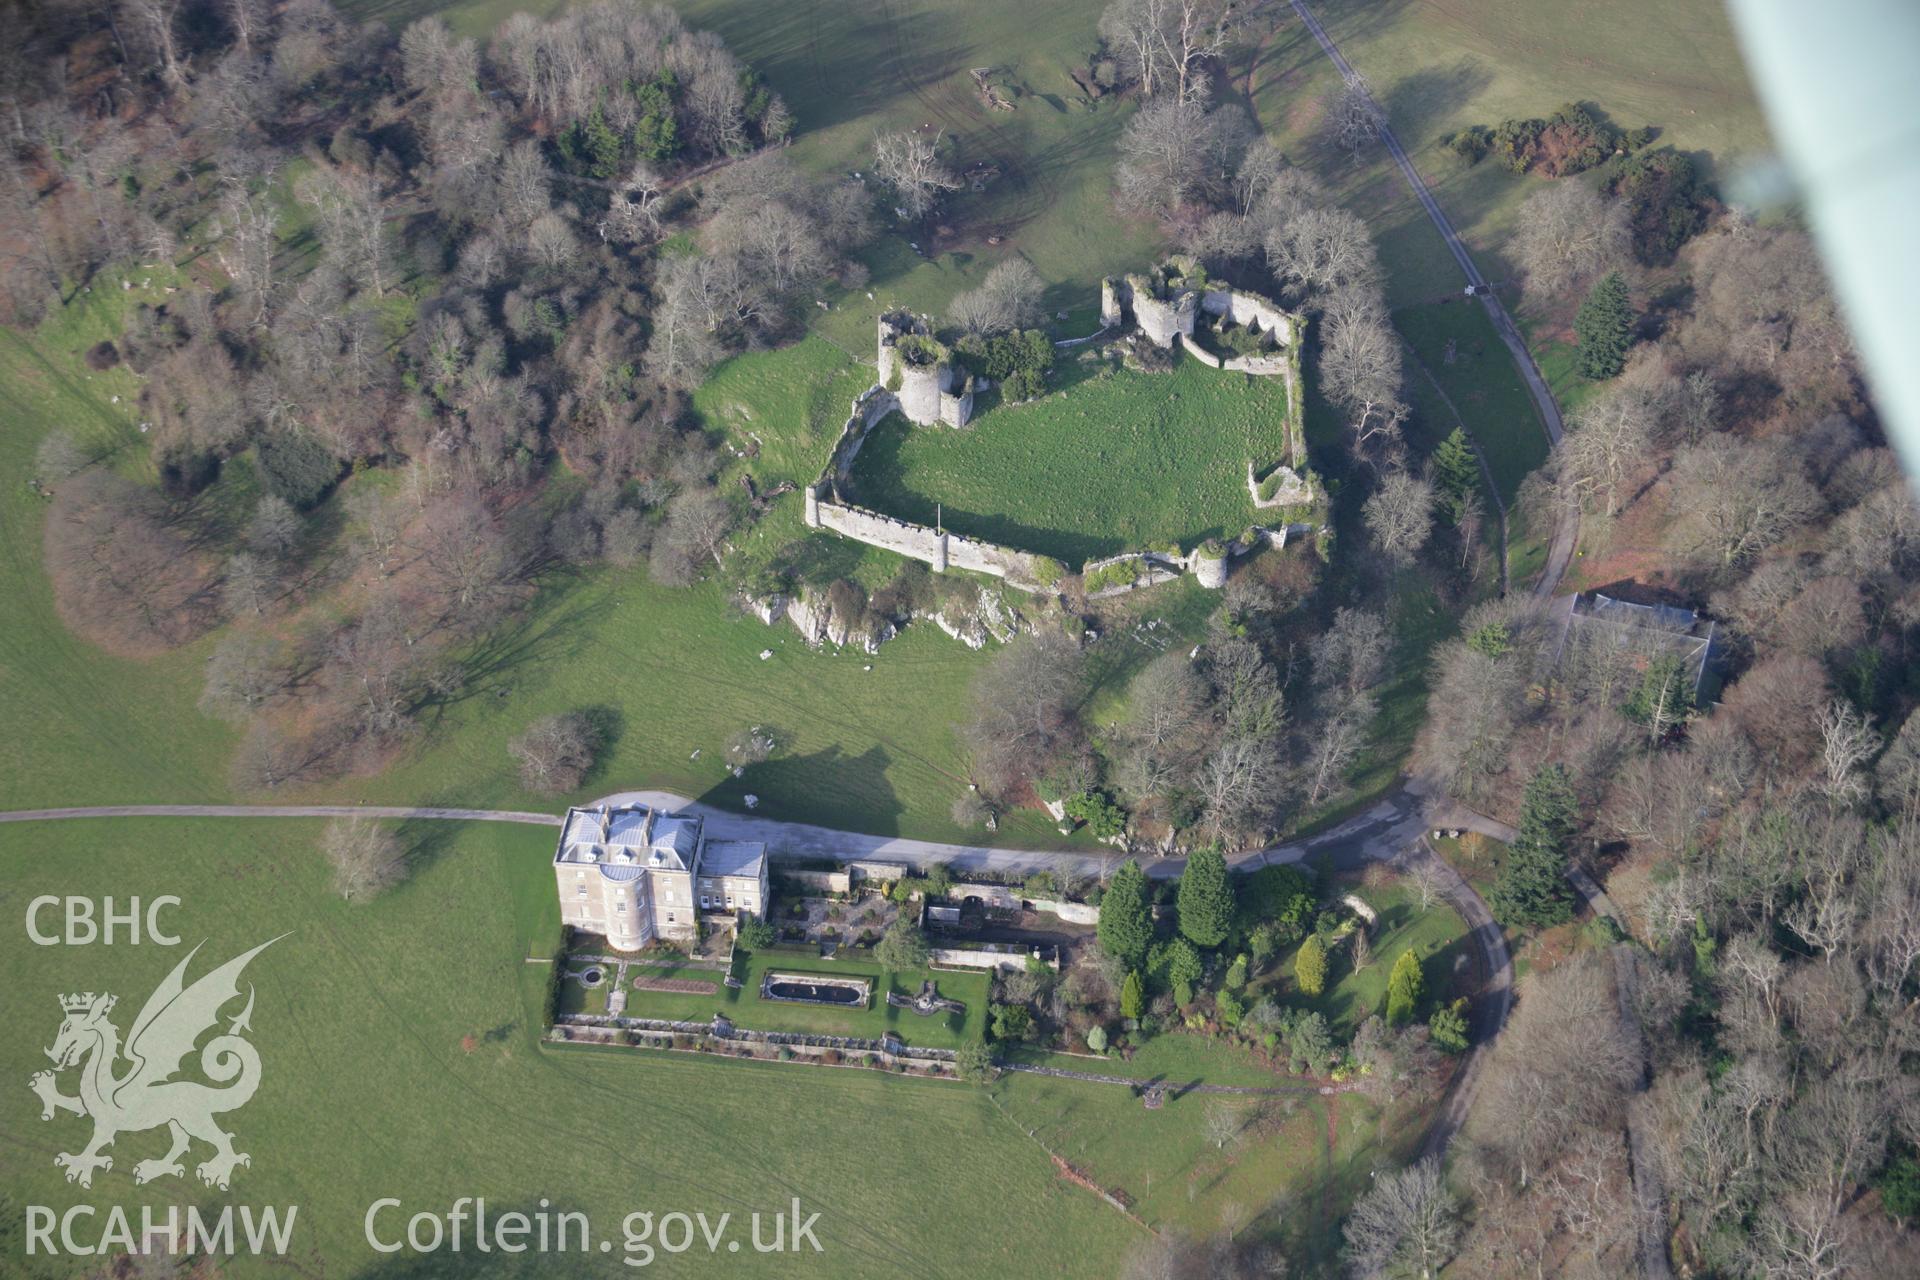 RCAHMW colour oblique aerial photograph of Penrice Castle, viewed from the south-east. Taken on 26 January 2006 by Toby Driver.